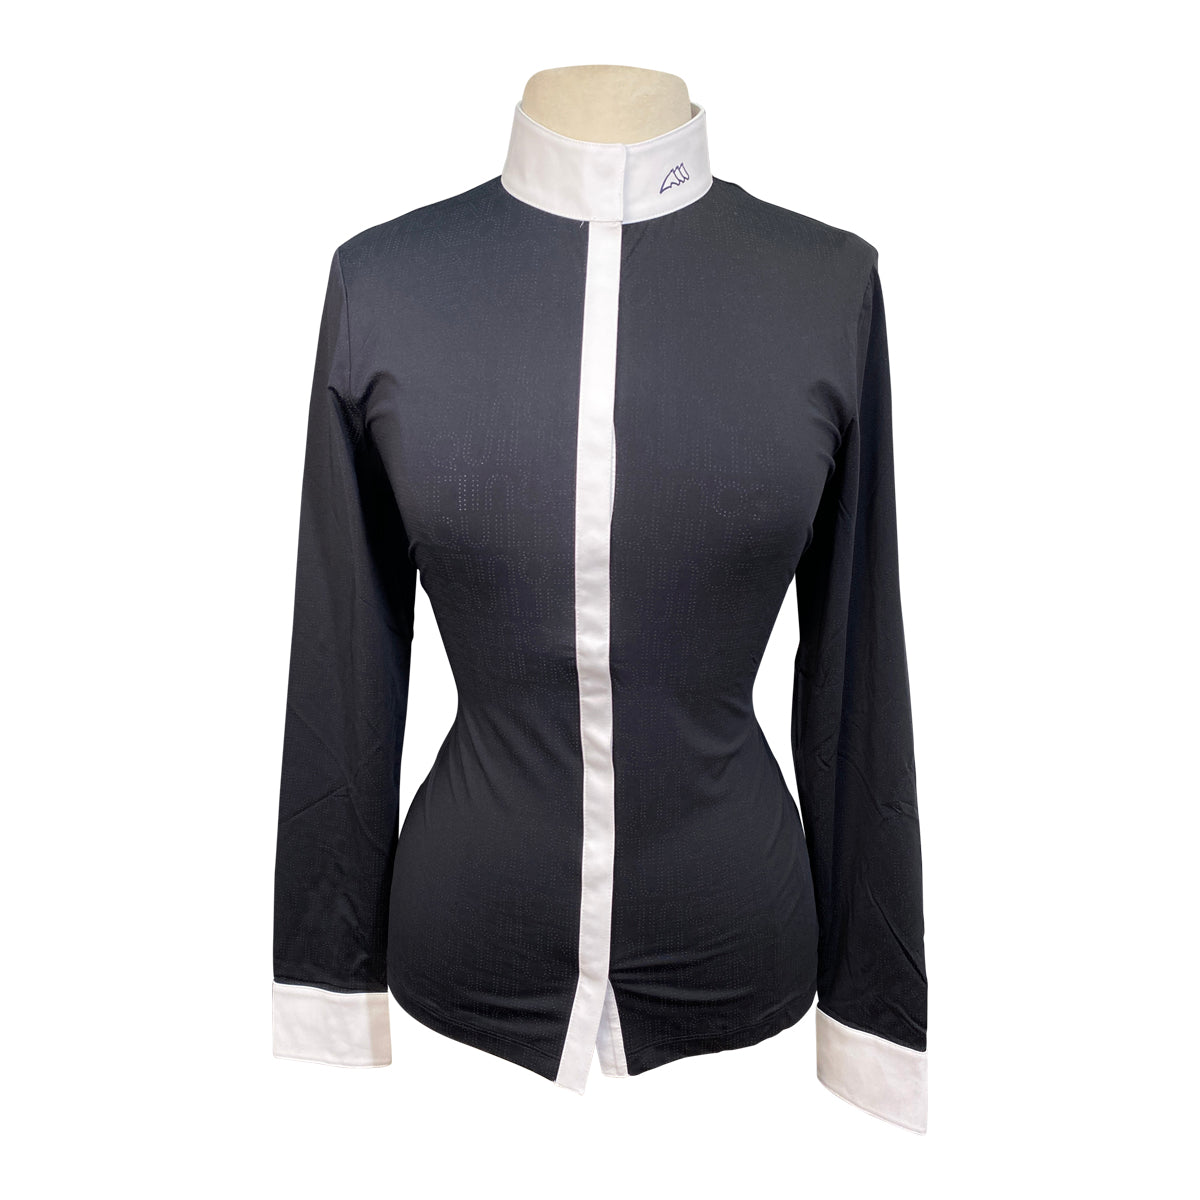 Equiline 'Cindrac' Long Sleeve Show Shirt in Black